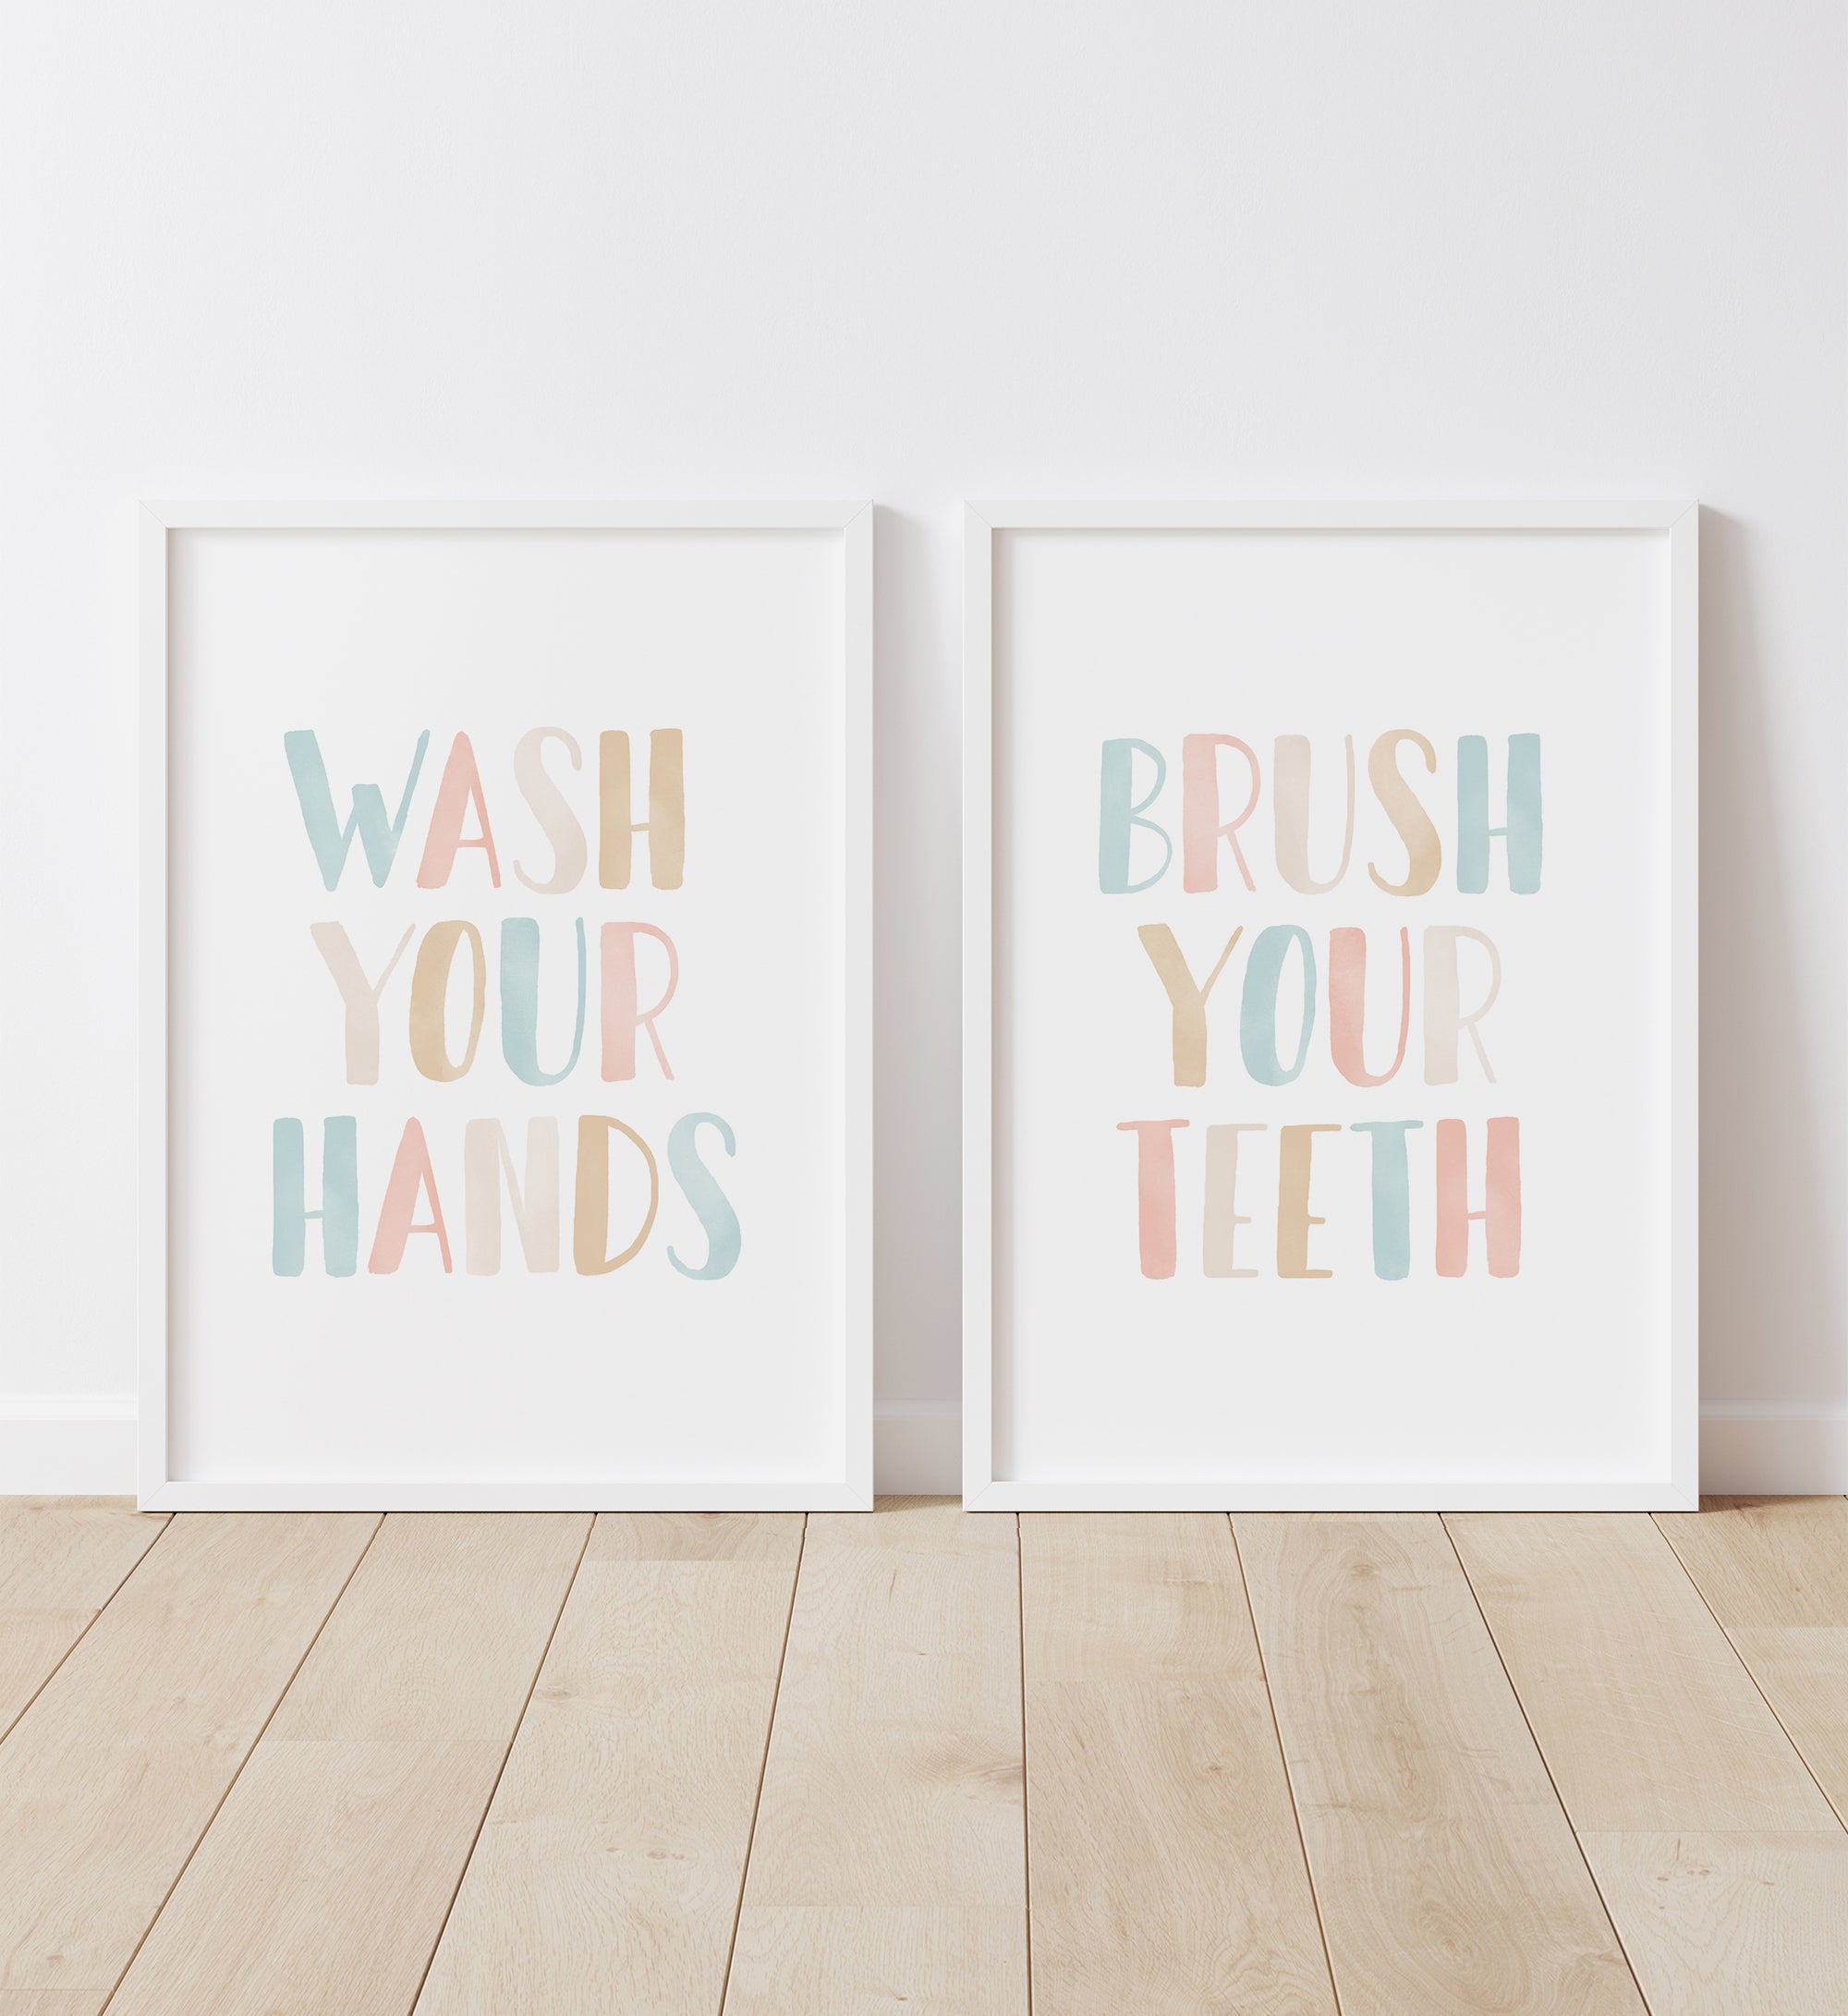 Wash Your Hands, Brush Your Teeth Set of 2 Prints No. 3